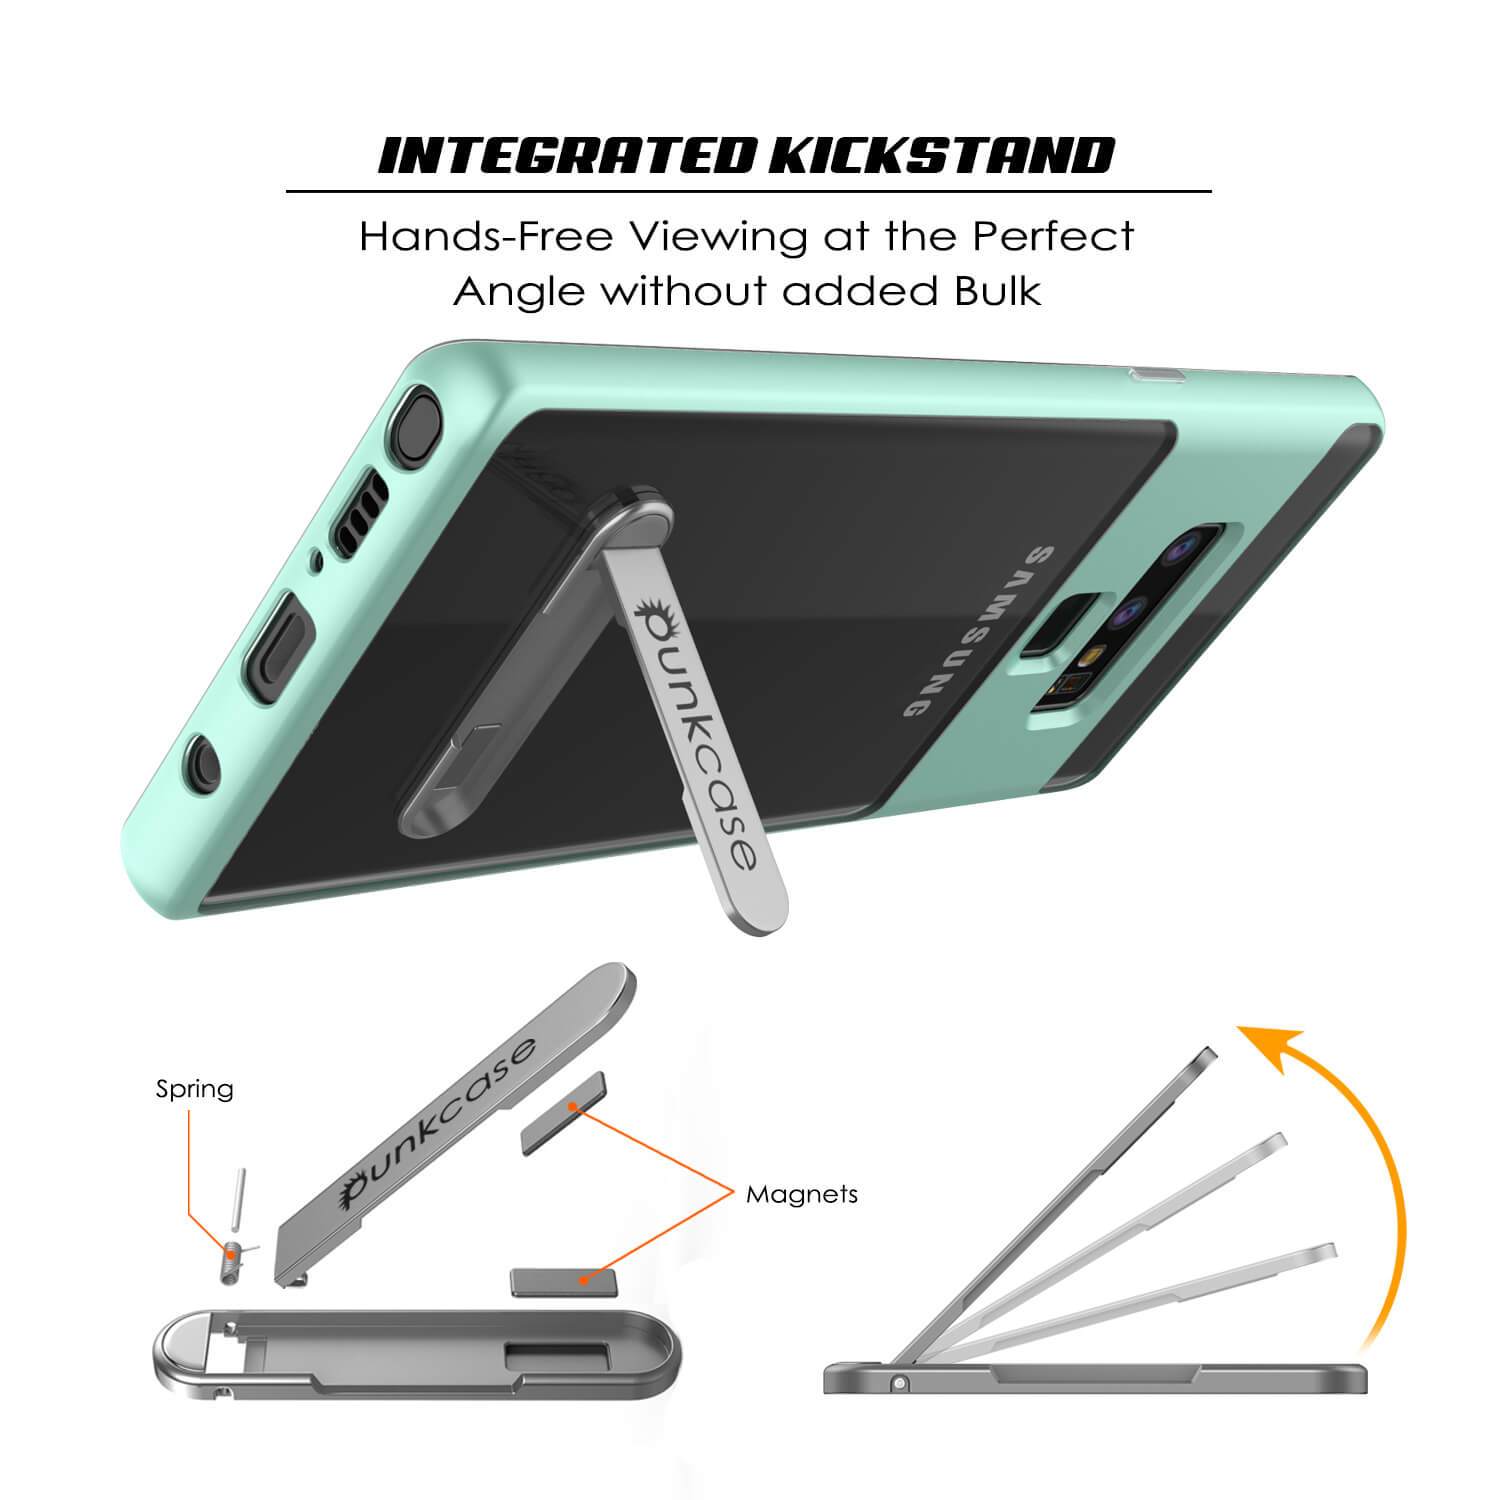 Galaxy Note 9 Lucid 3.0 PunkCase Armor Cover w/Integrated Kickstand and Screen Protector [Teal] - PunkCase NZ